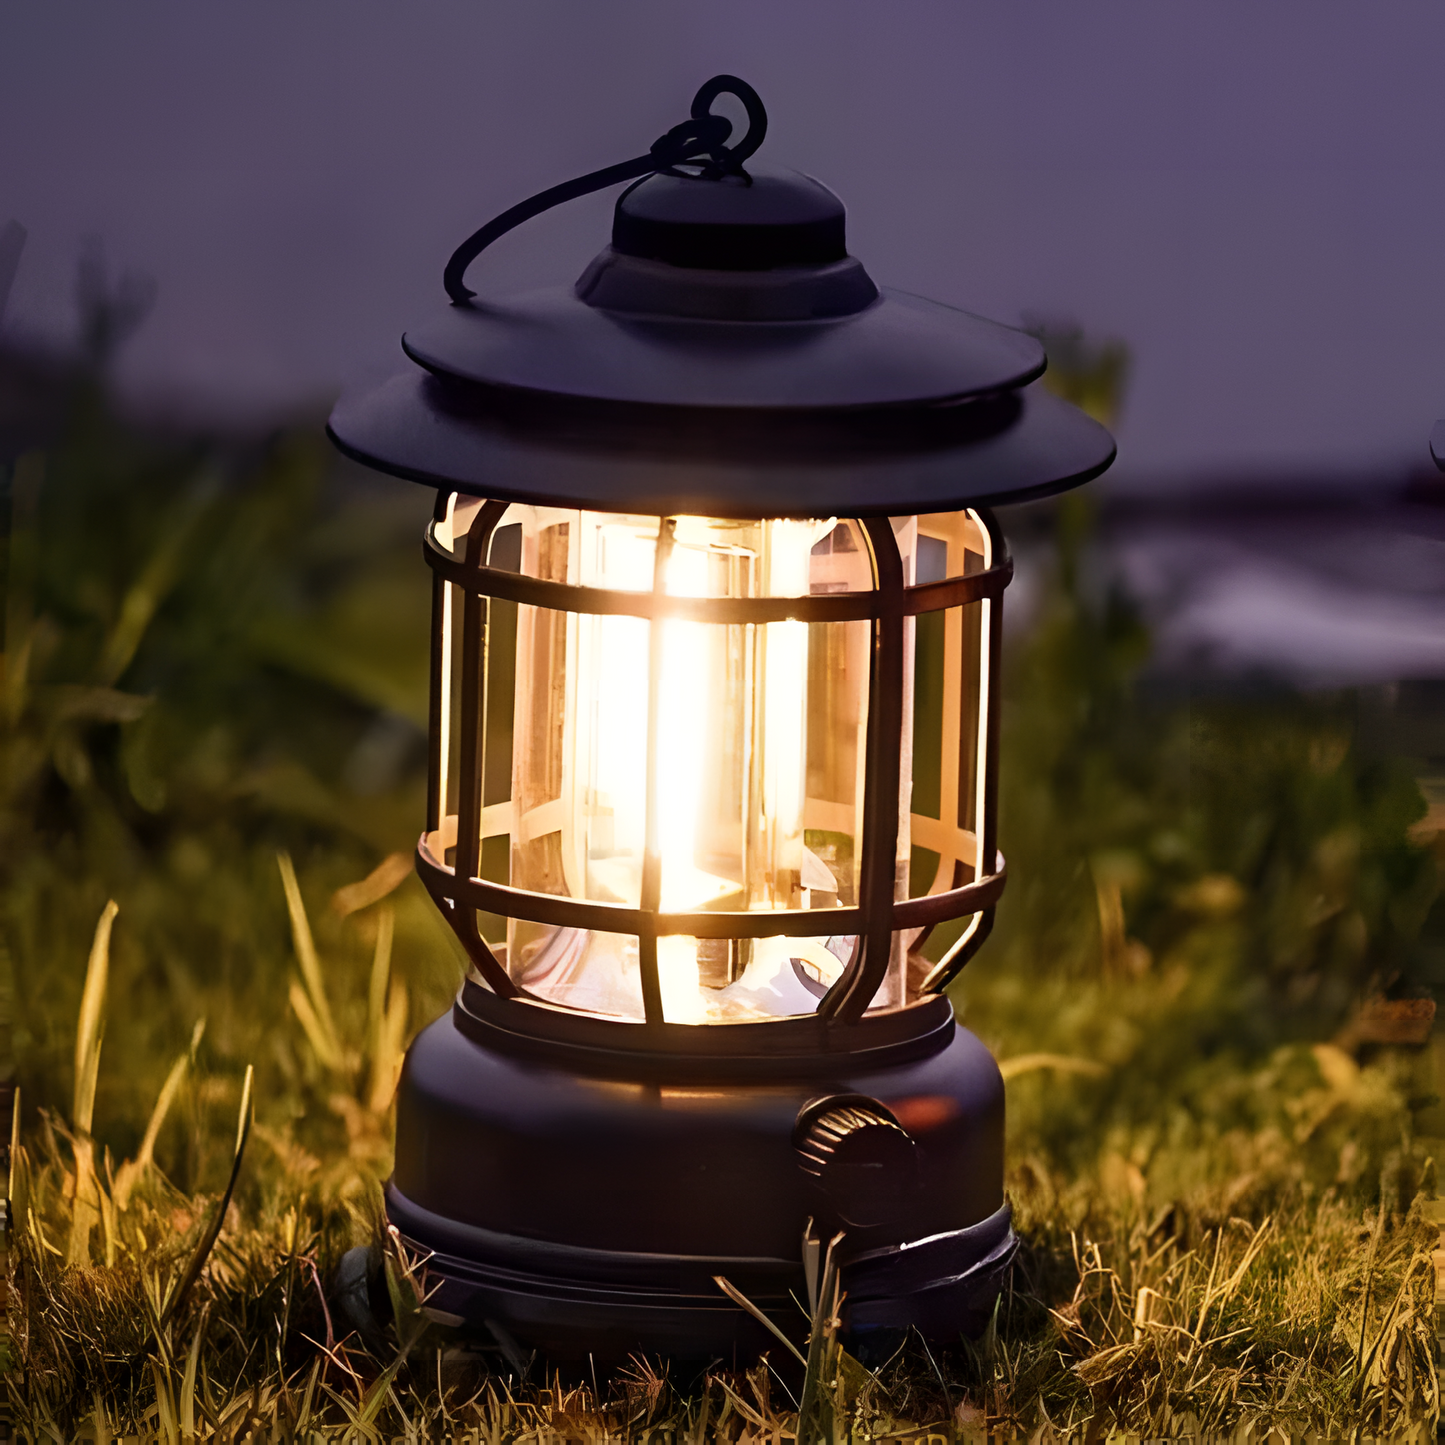 Rechargeable LED Lantern Light Oula Camping Outdoor